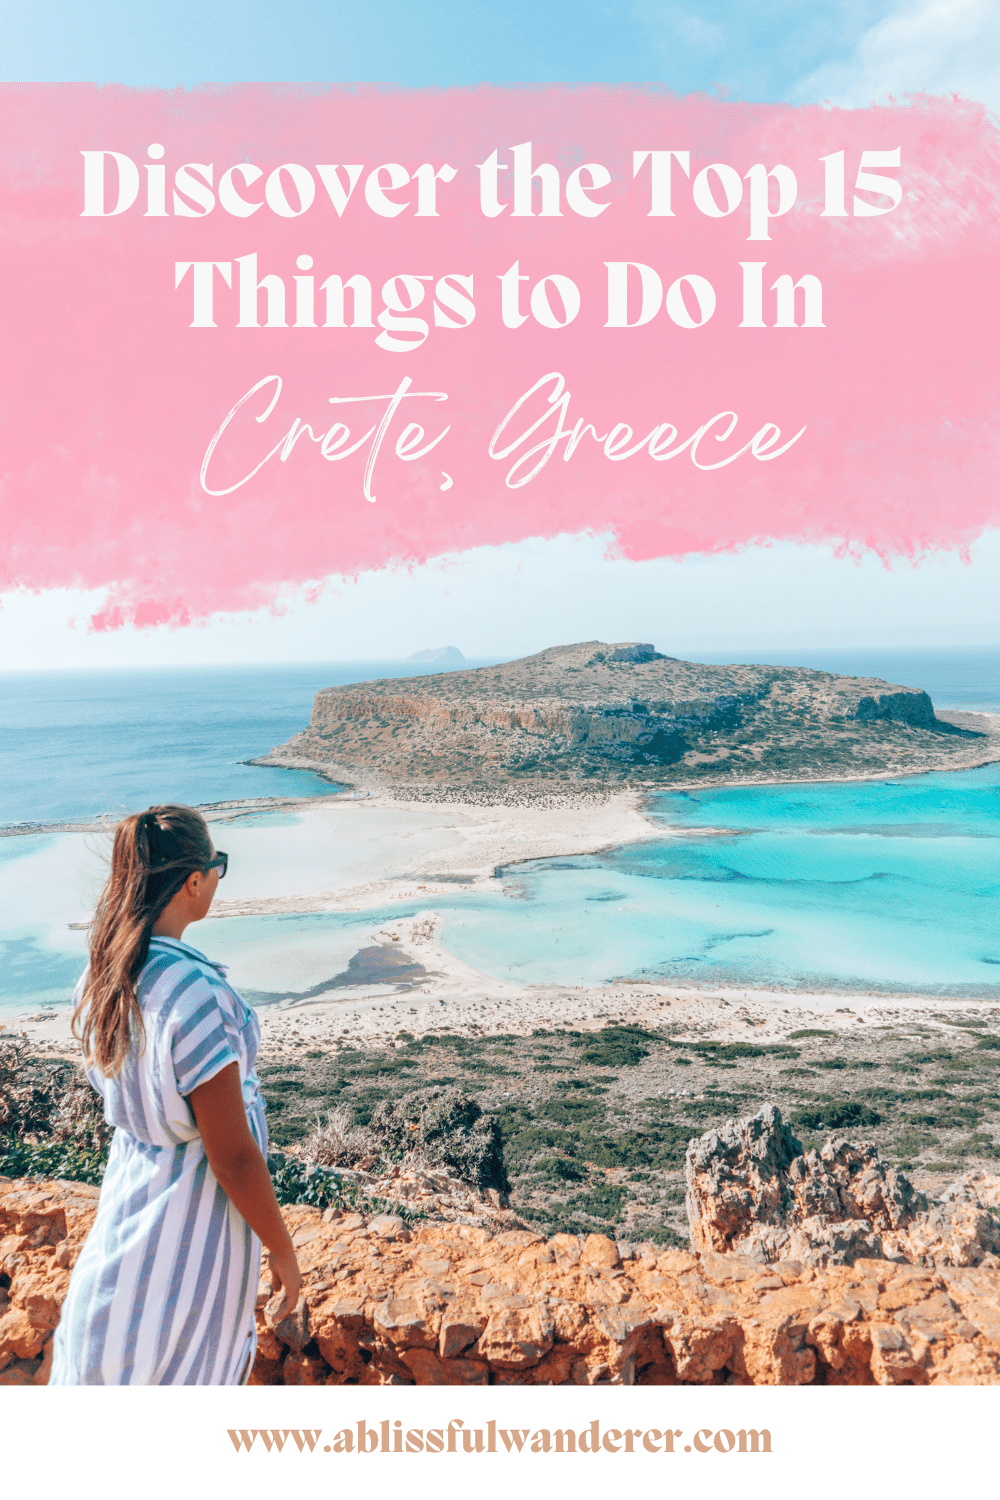 Pin: Discover the best of Crete, Greece with our list of 15 top things to do. From exploring ancient ruins to relaxing on pristine beaches, there's something for everyone!